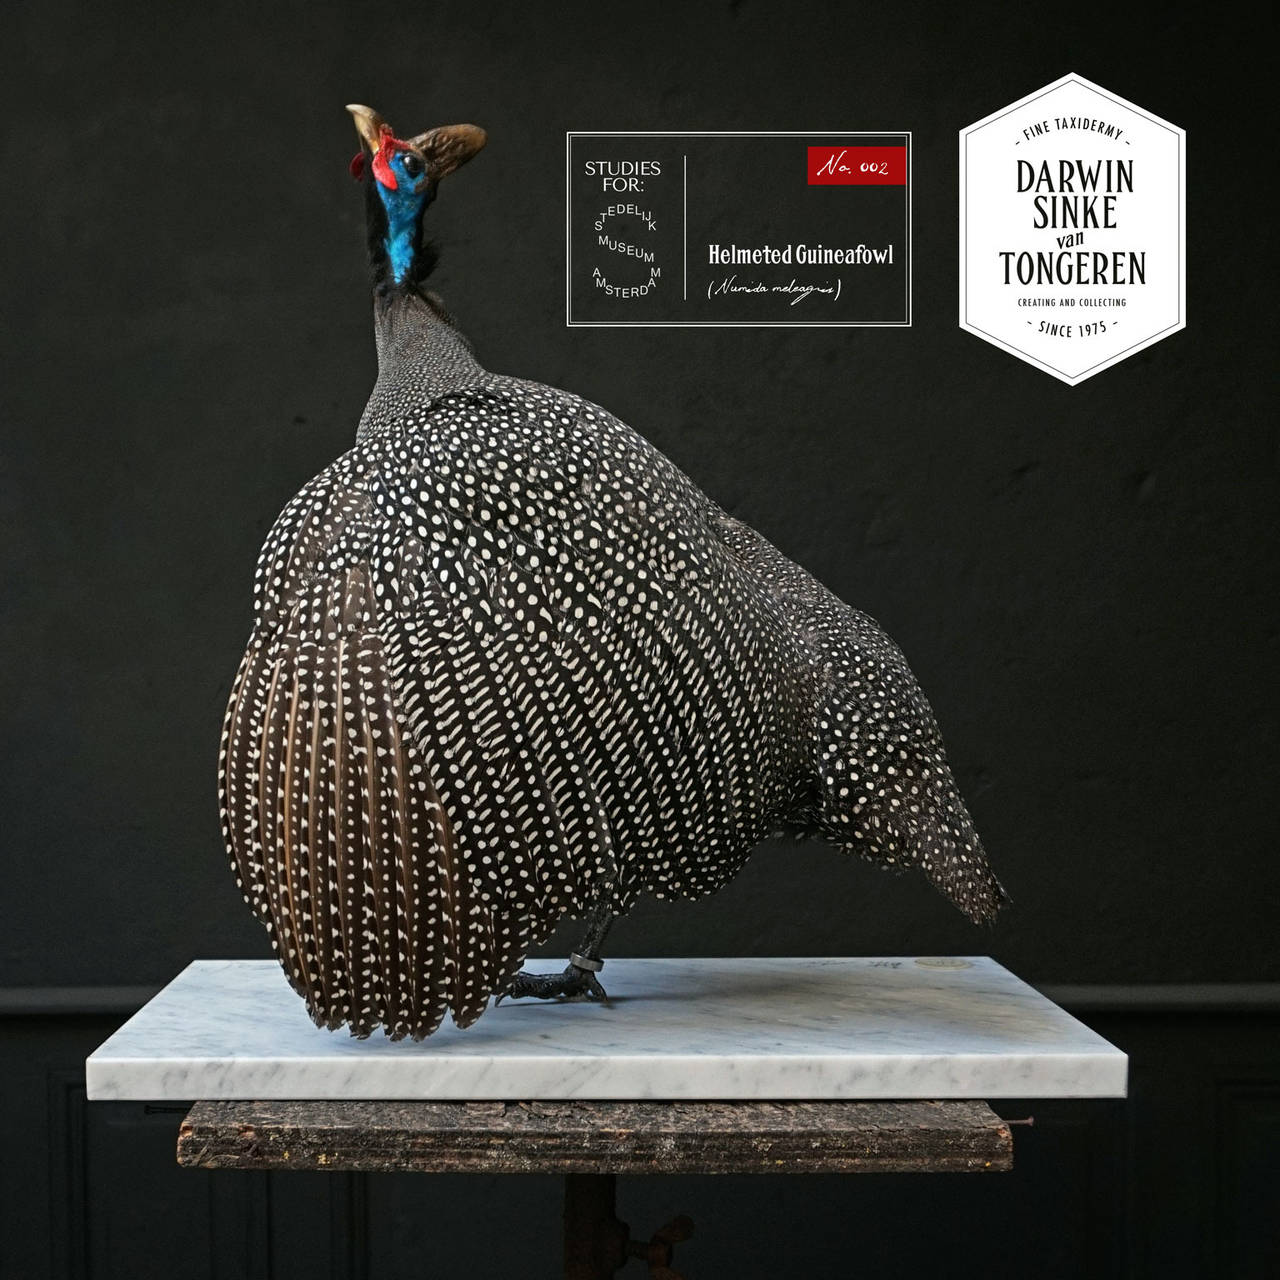 This fine taxidermy object of a rare Reichenow's Helmeted Guineafowl on a marble base is one of five works that are currently on loan for display at the Stedelijk Museum, Amsterdam. Therefore note that these works will be available for delivery